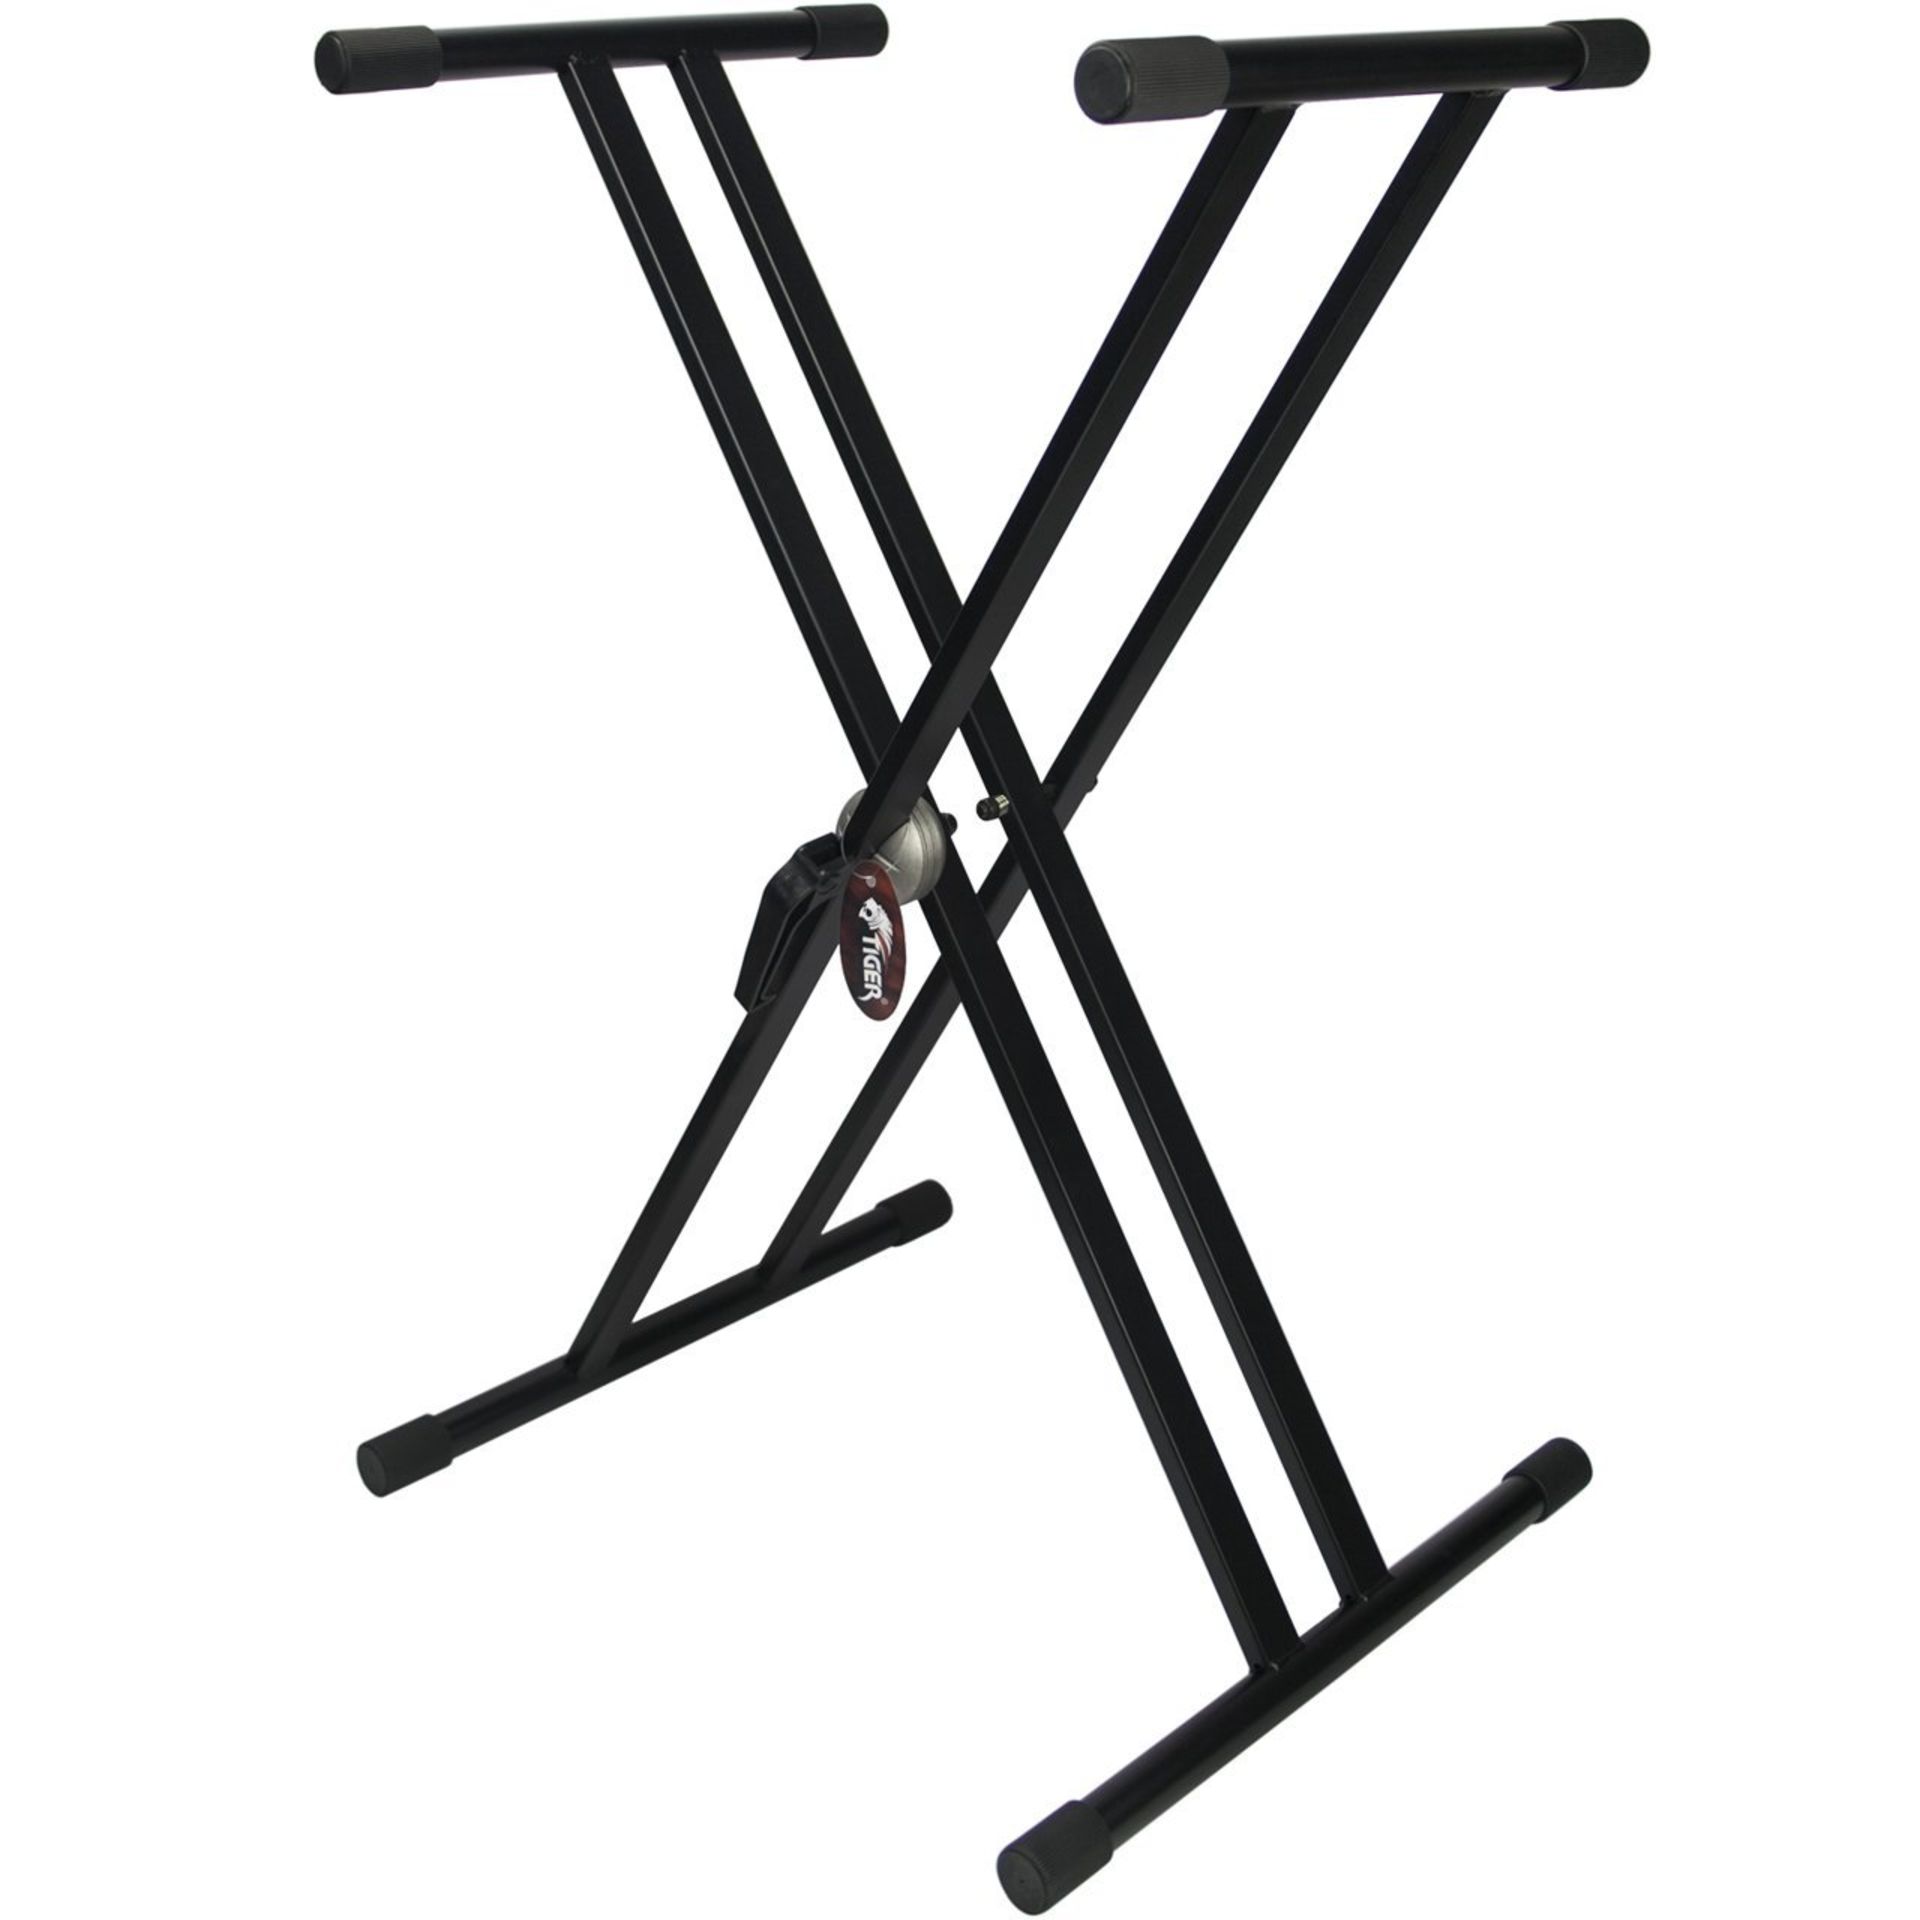 Tiger Keyboard Stand - Double Braced X Frame Keyboard Stand